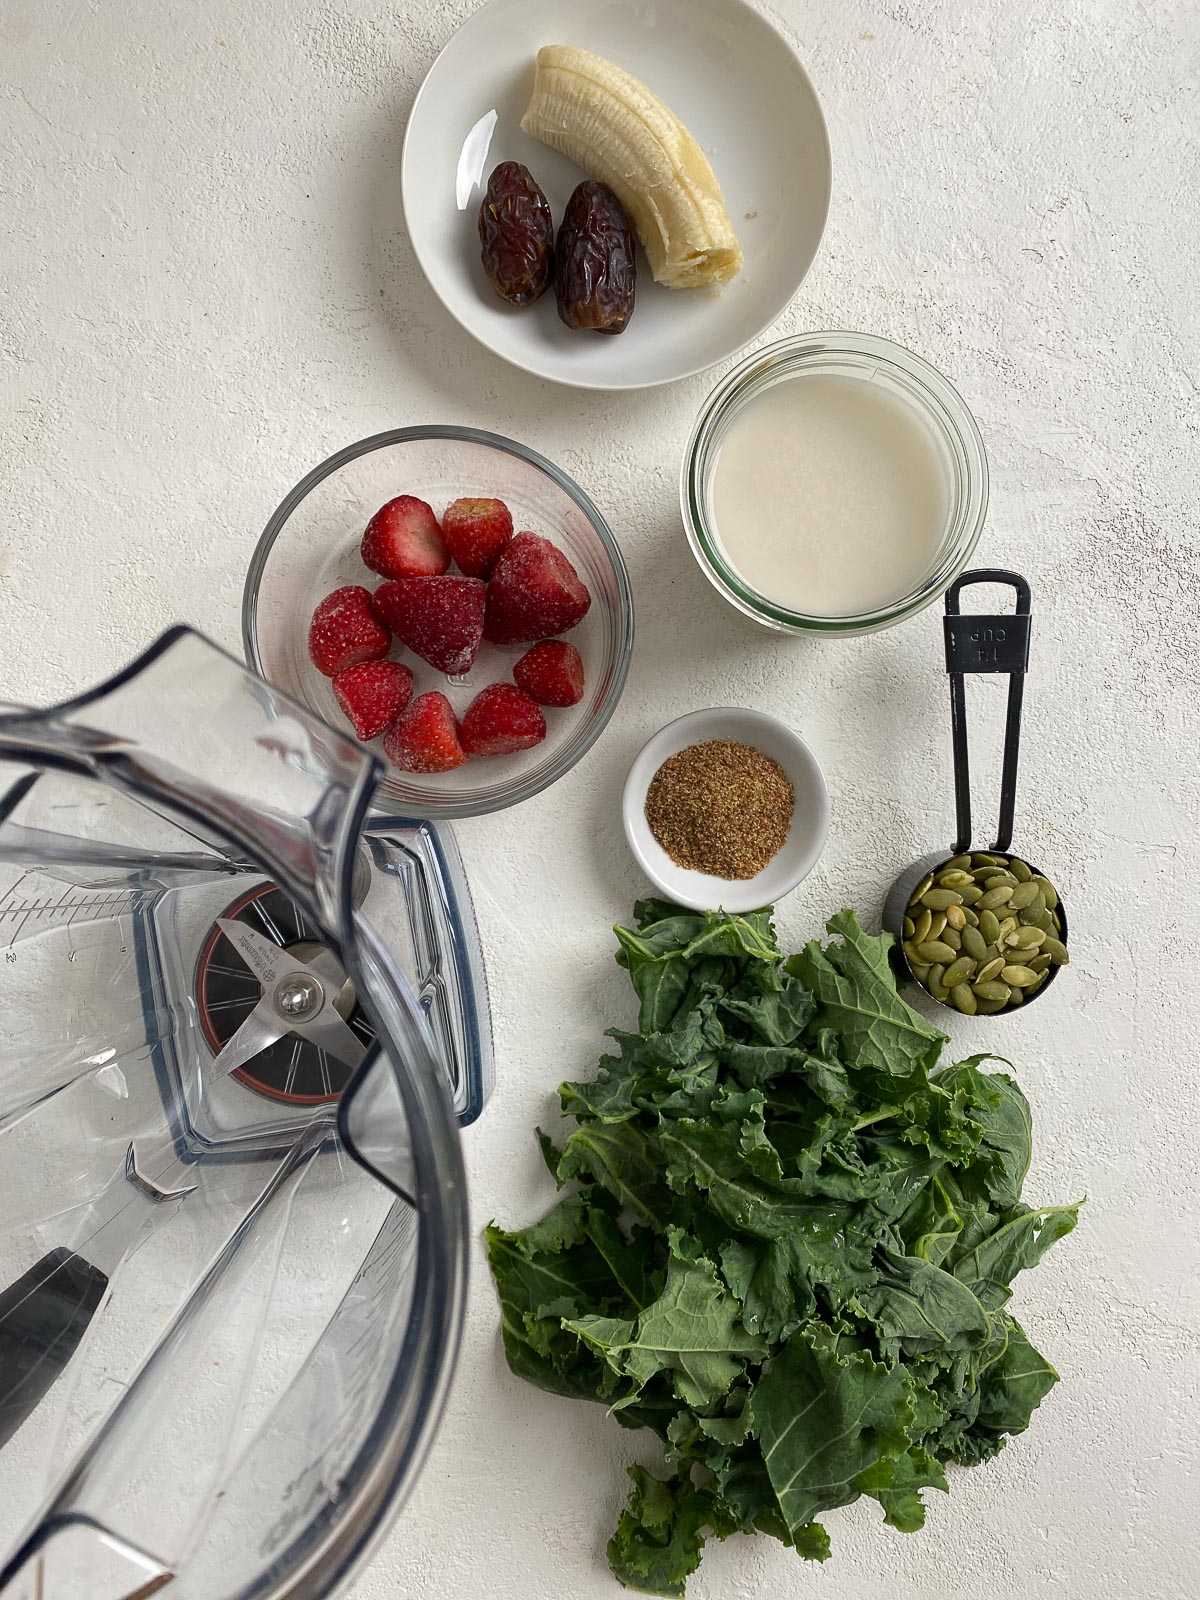 ingredients for Strawberry Kale Smoothie spread out on a white surface alongside a blender